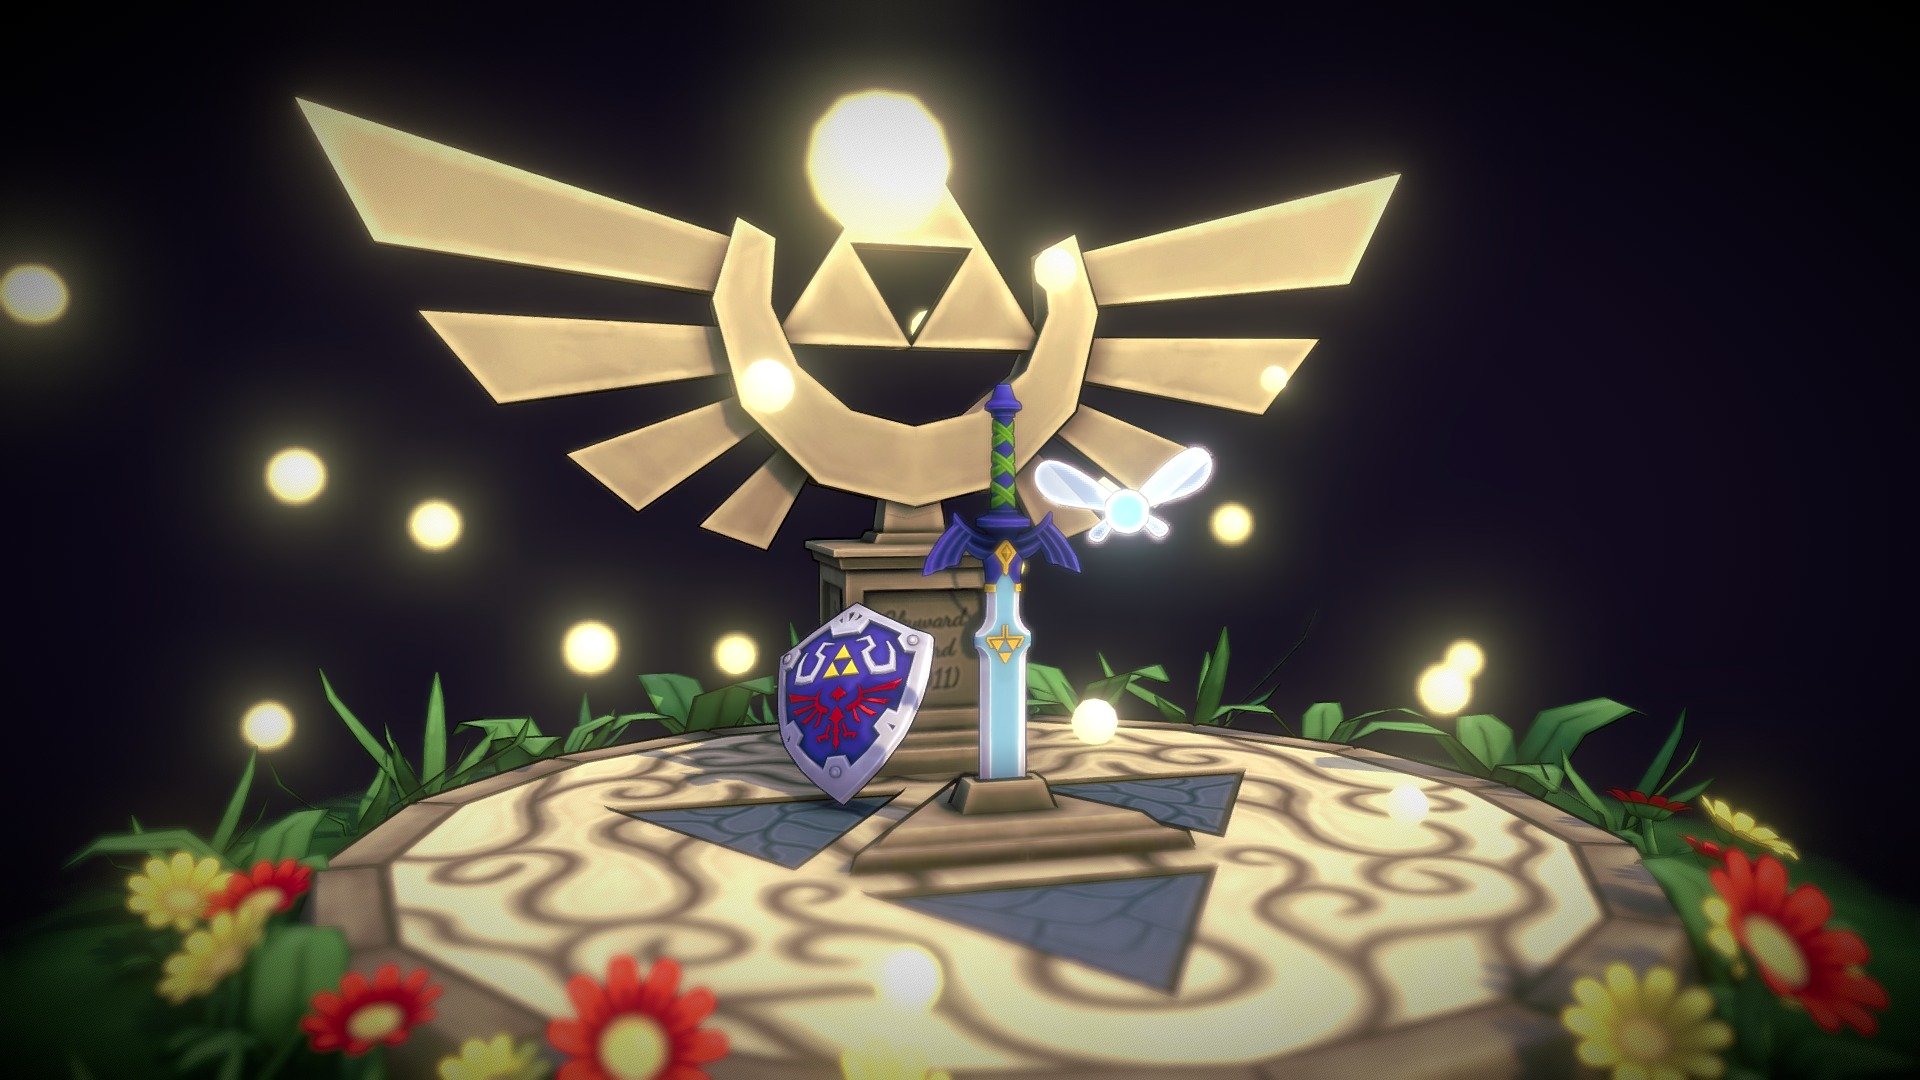 A fan-art from the game The Legend of Zelda! Link's Master Sword and shield awaiting for him on a calm, magic forest, while Navi flies around. Engraved on the statue, the games from the series that I have completed so far.

My first attempt at handpaint (well, months ago I did one with the mouse, but that doesn't count :P), and I'm really really satisfied with the mood of the scene and the result :D It's quite a change from my usual style.

It began as an approach to modeling in 3dsMax with the Master Sword, then with the shield&hellip; and I couldn't resist, I had to make the scene. Textured and animated with Blender.

It was really fun to make this one&hellip; I hope you like it! :)

(I really encourage you to play this song in the background to grasp the fully inmersive experience! https://www.youtube.com/watch?v=D53BB879bjQ) - The Legend of Zelda Diorama - 3D model by Ivanix88 3d model